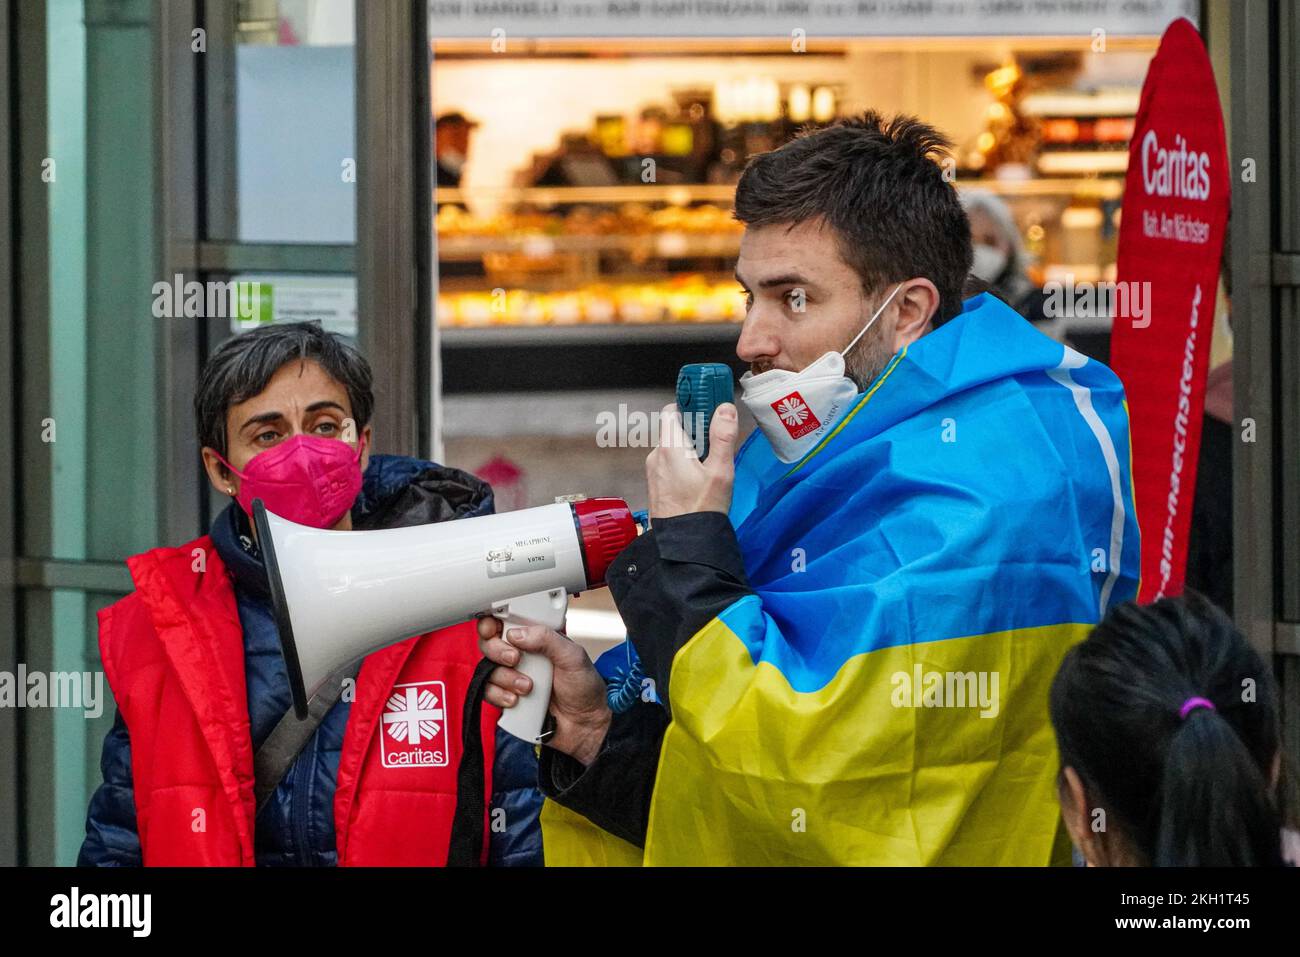 A volunteer uses a megaphone to give information to the Ukrainian people seeking help. Stock Photo